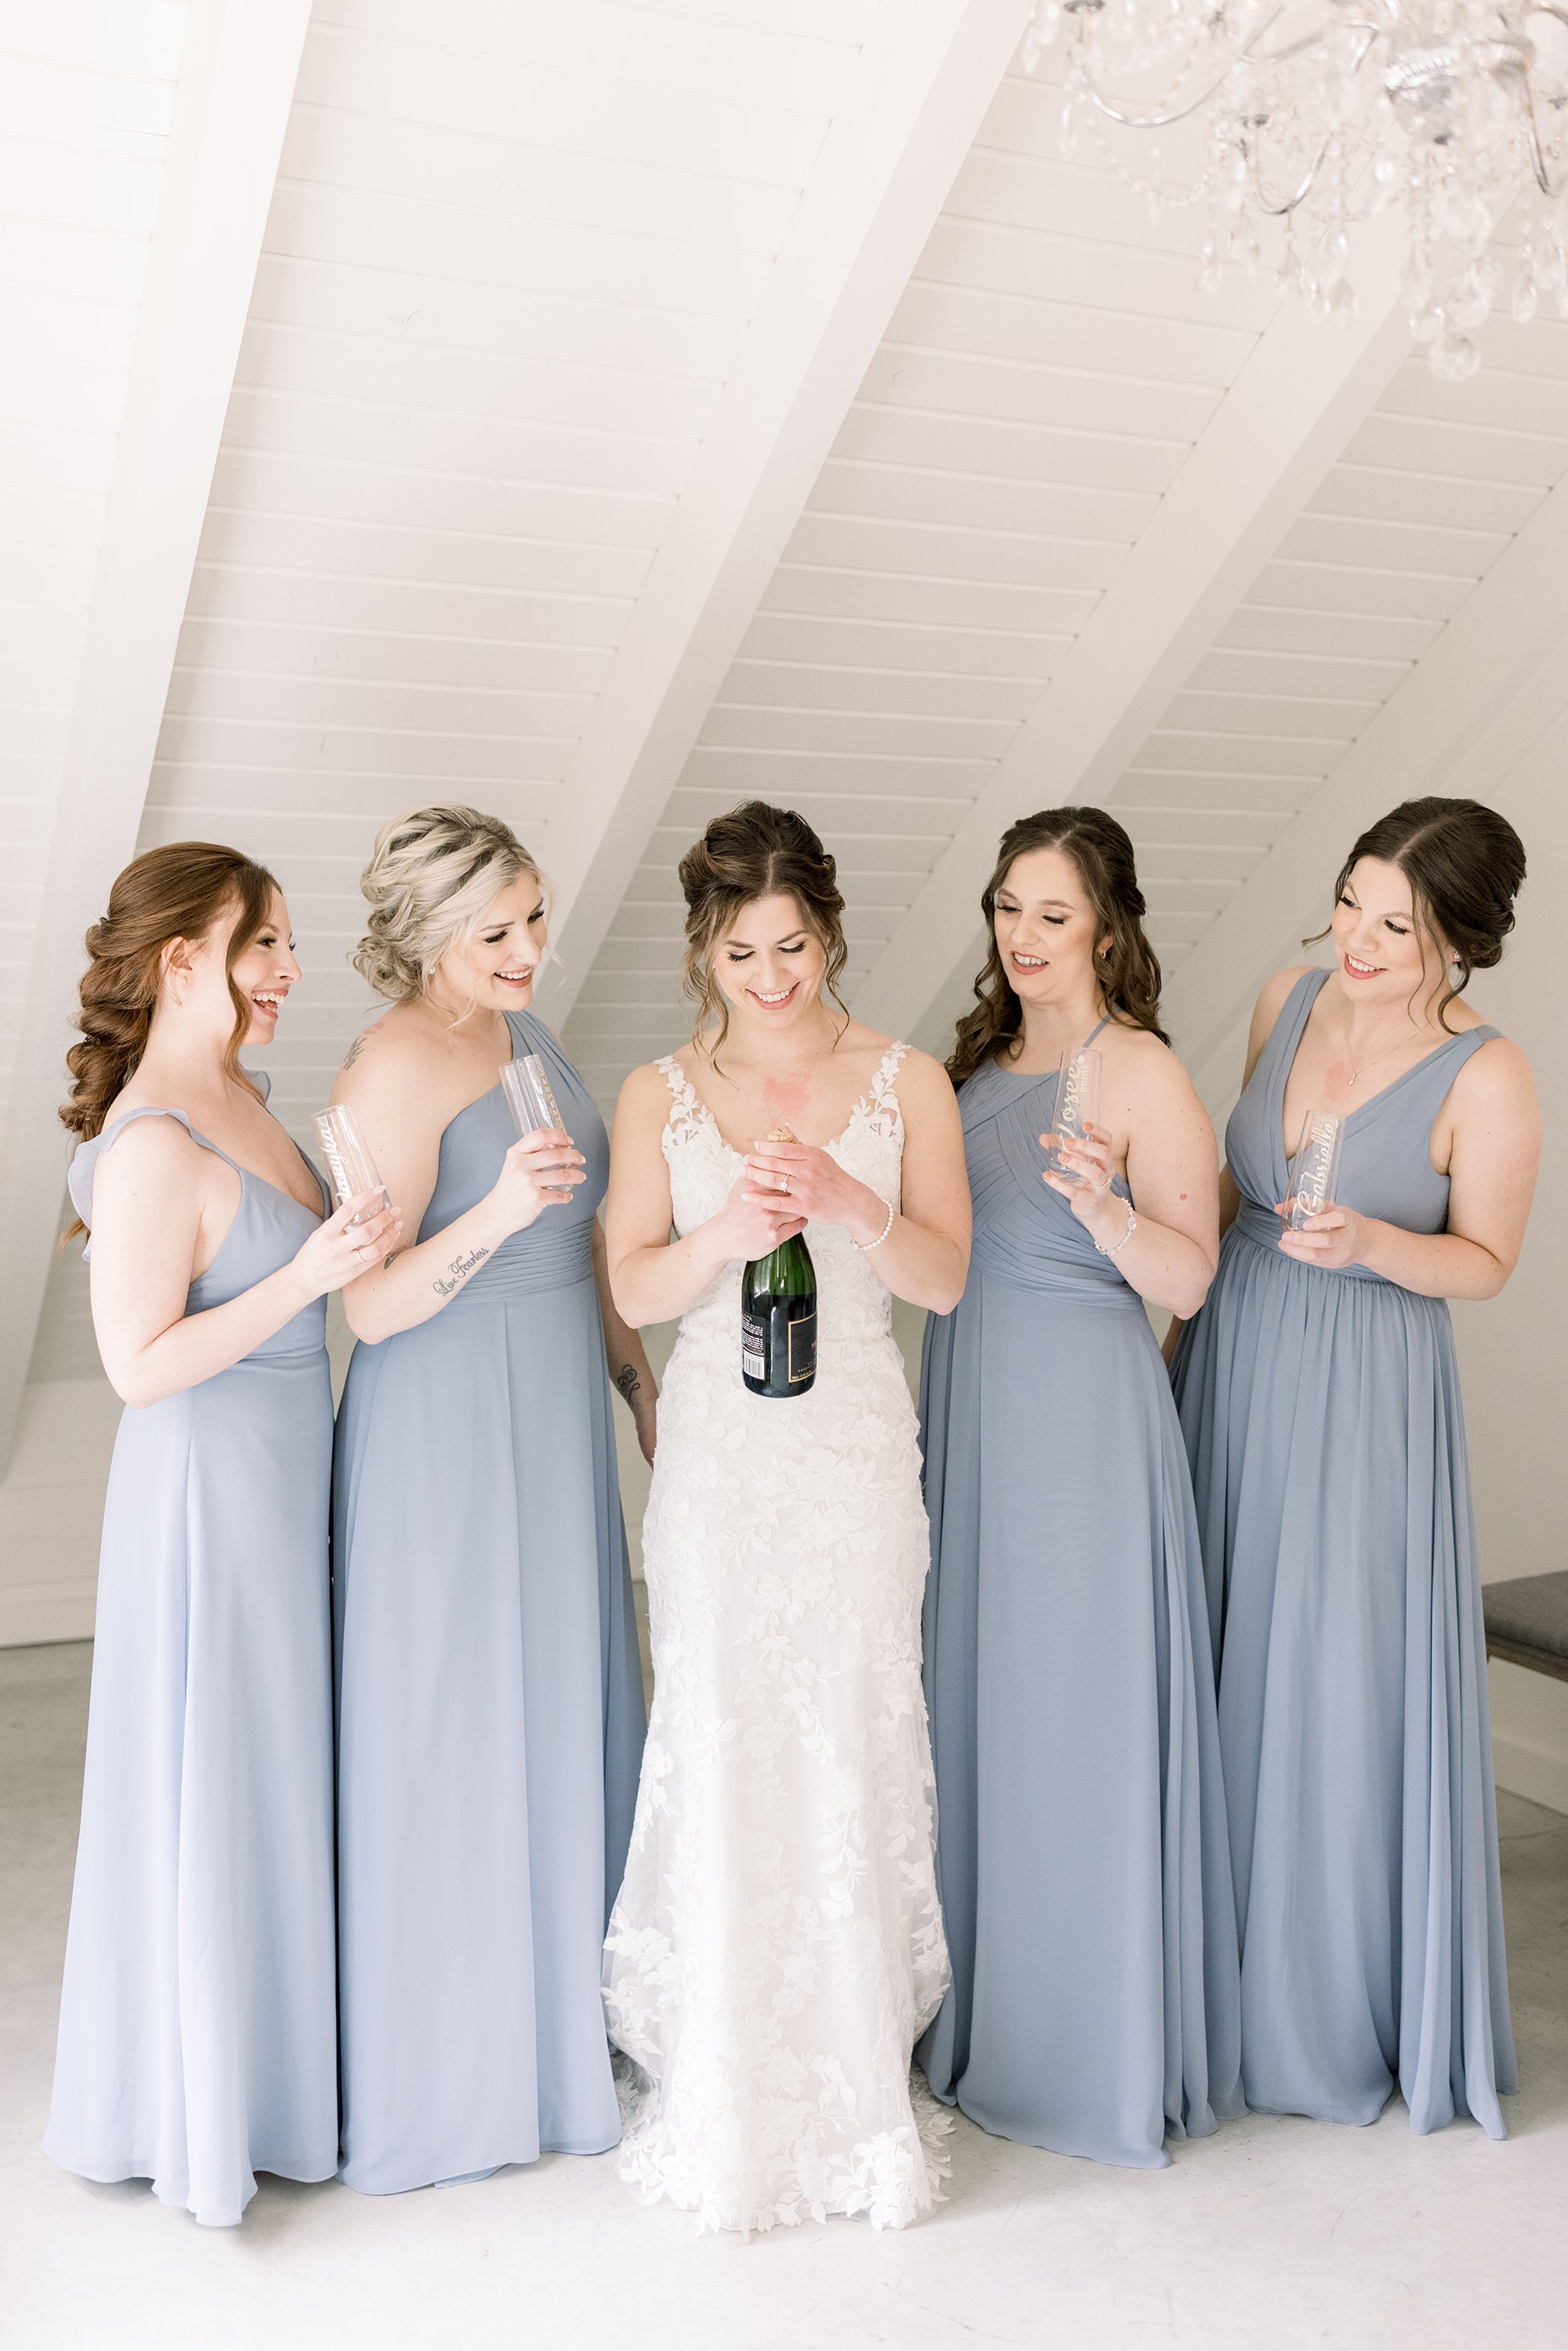  A bride with her bridesmaids all holding drinks to celebrate the wedding day by Chelsea Mason Photography. celebrate on wedding day #ChelseaMasonPhotography #ChelseaMasonWeddings #WakefieldWeddings #LeBelvedere #Wakefieldweddingphotographers 